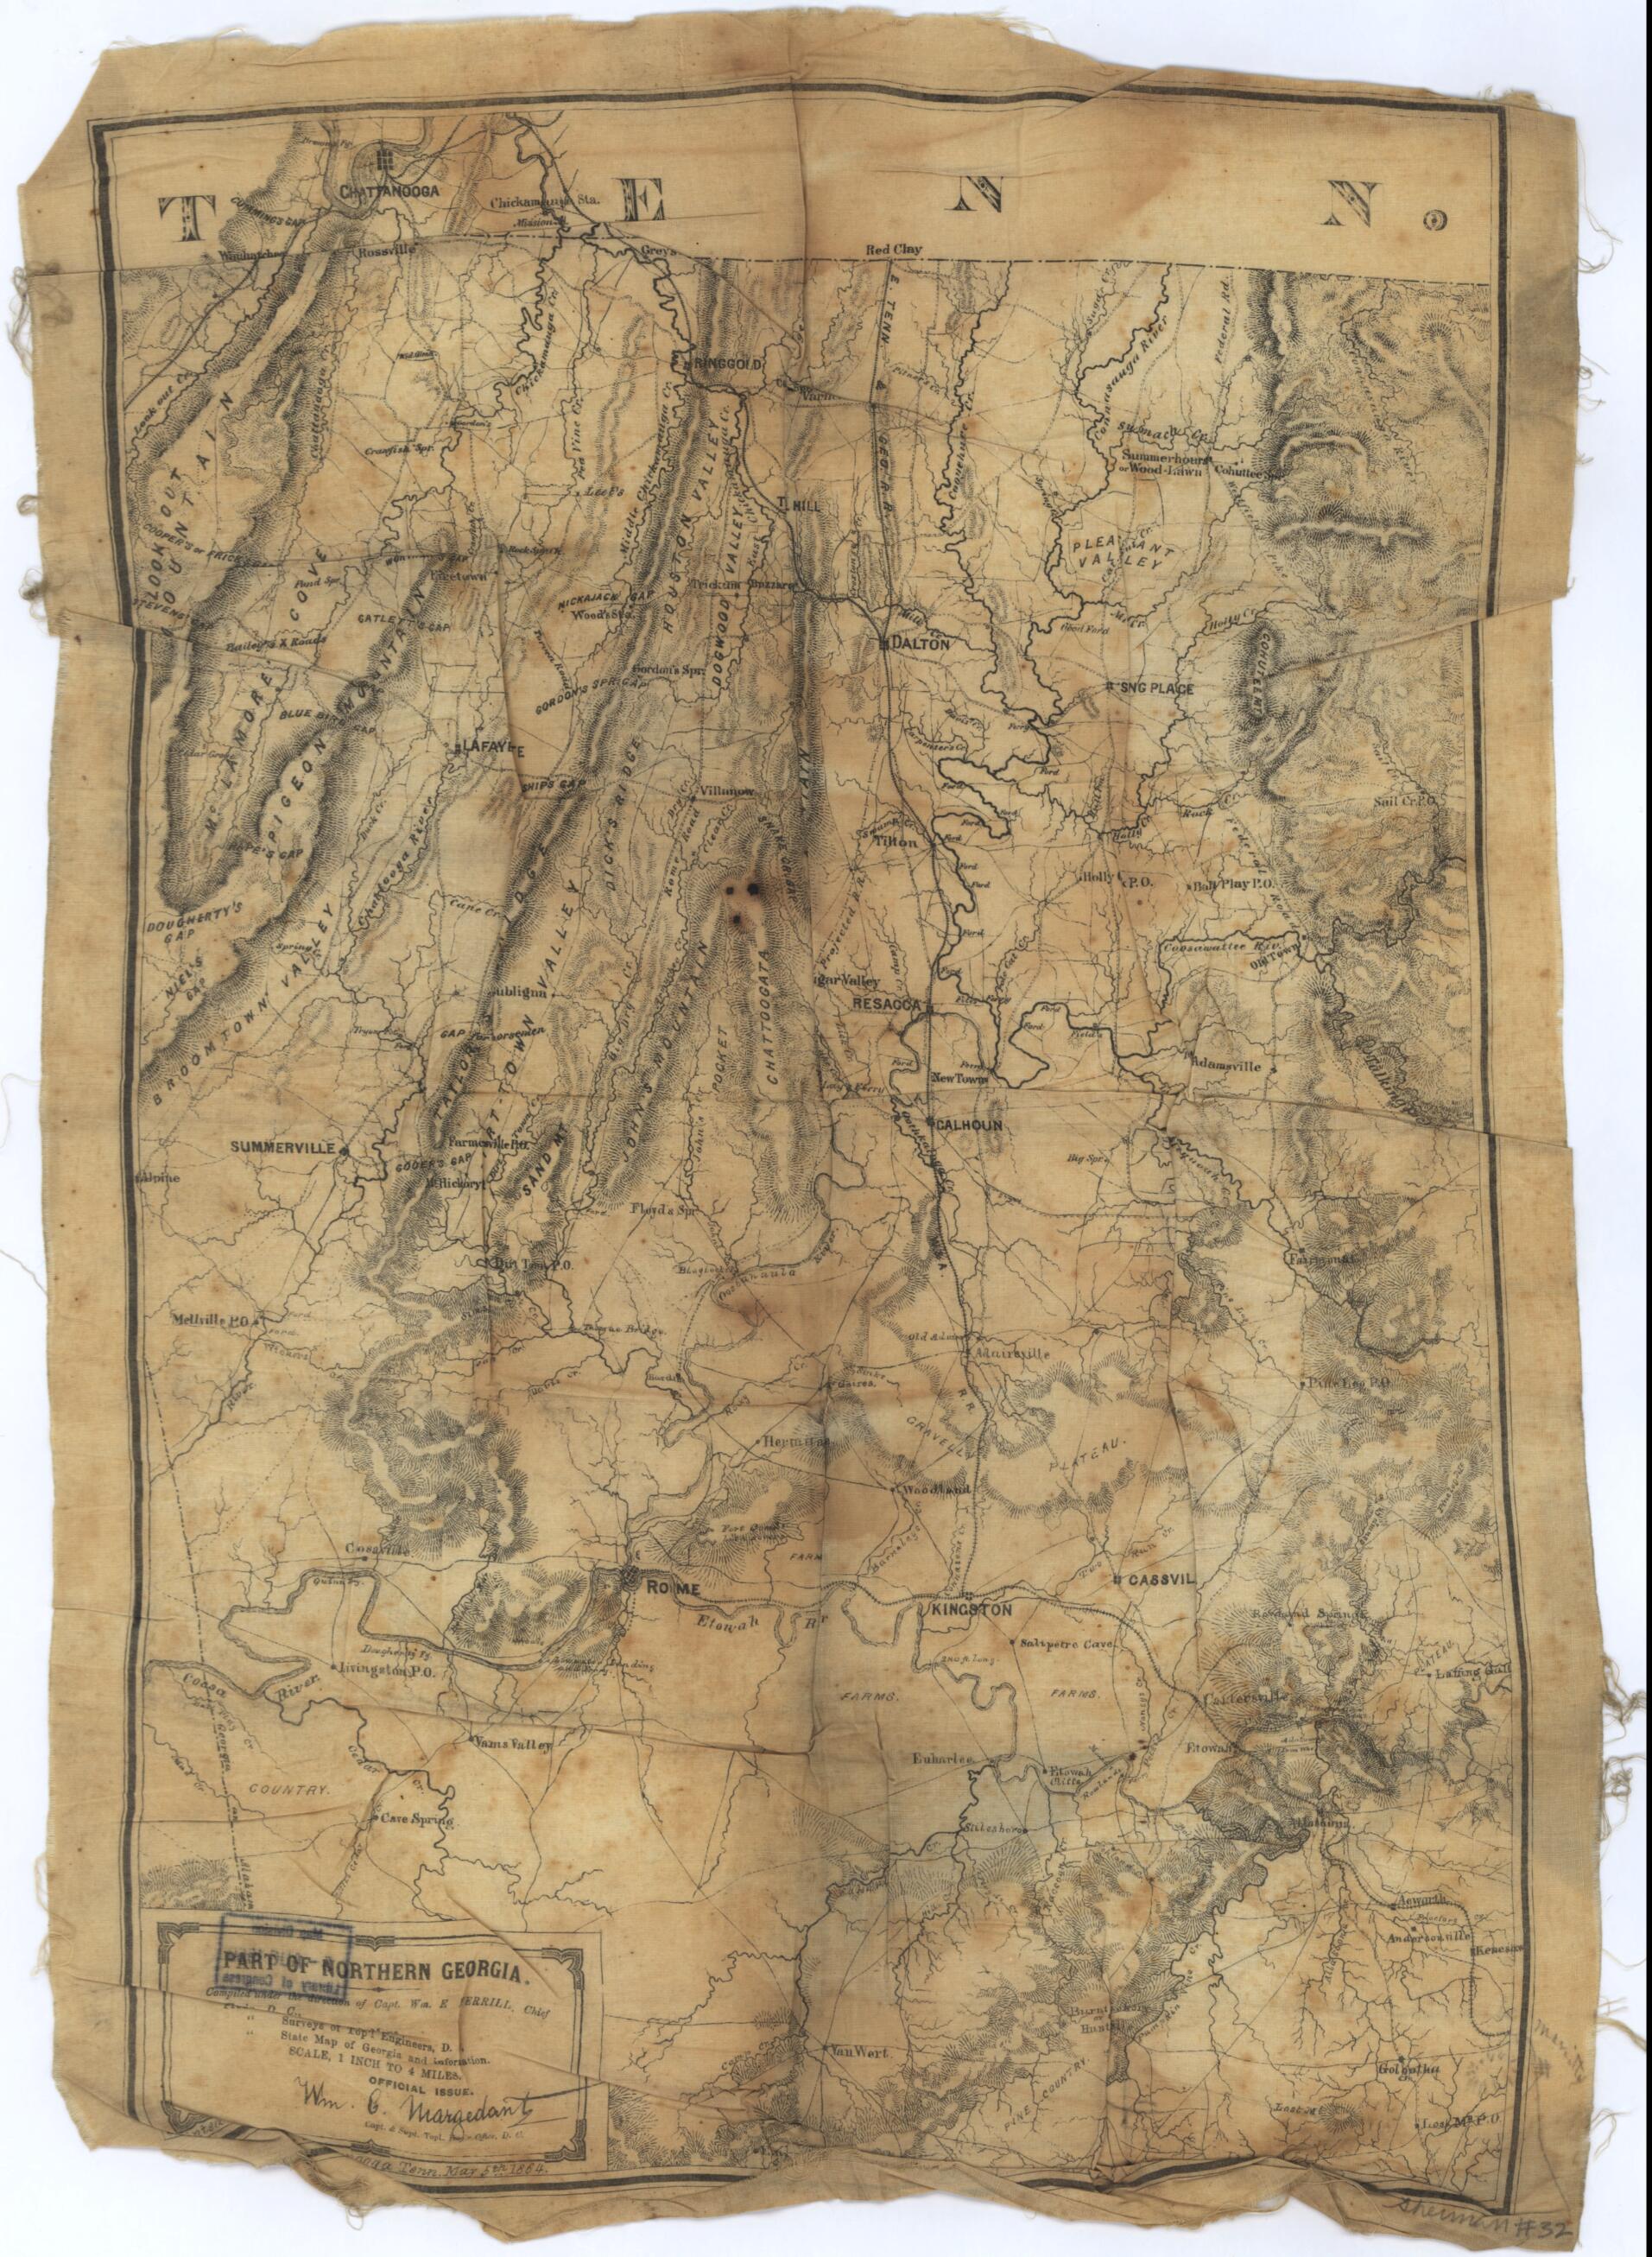 This old map of Part of Northern Georgia from 1864 was created by Wm. C. (William C.) Margedant, W. E. (William Emery) Merrill,  United States. Army. Corps of Topographical Engineers in 1864